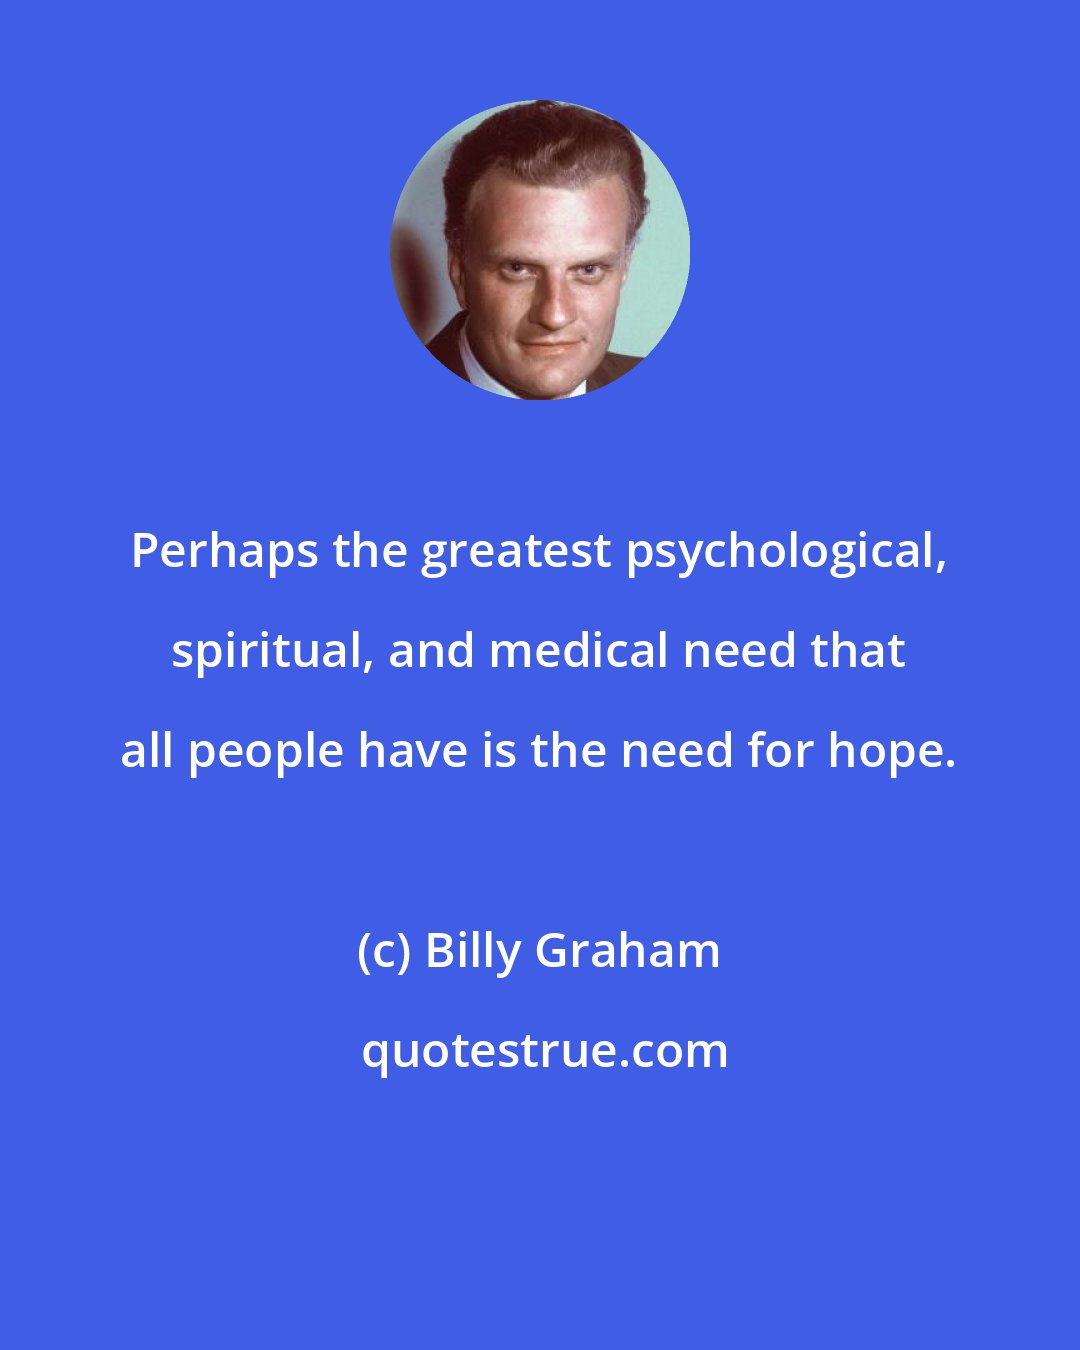 Billy Graham: Perhaps the greatest psychological, spiritual, and medical need that all people have is the need for hope.